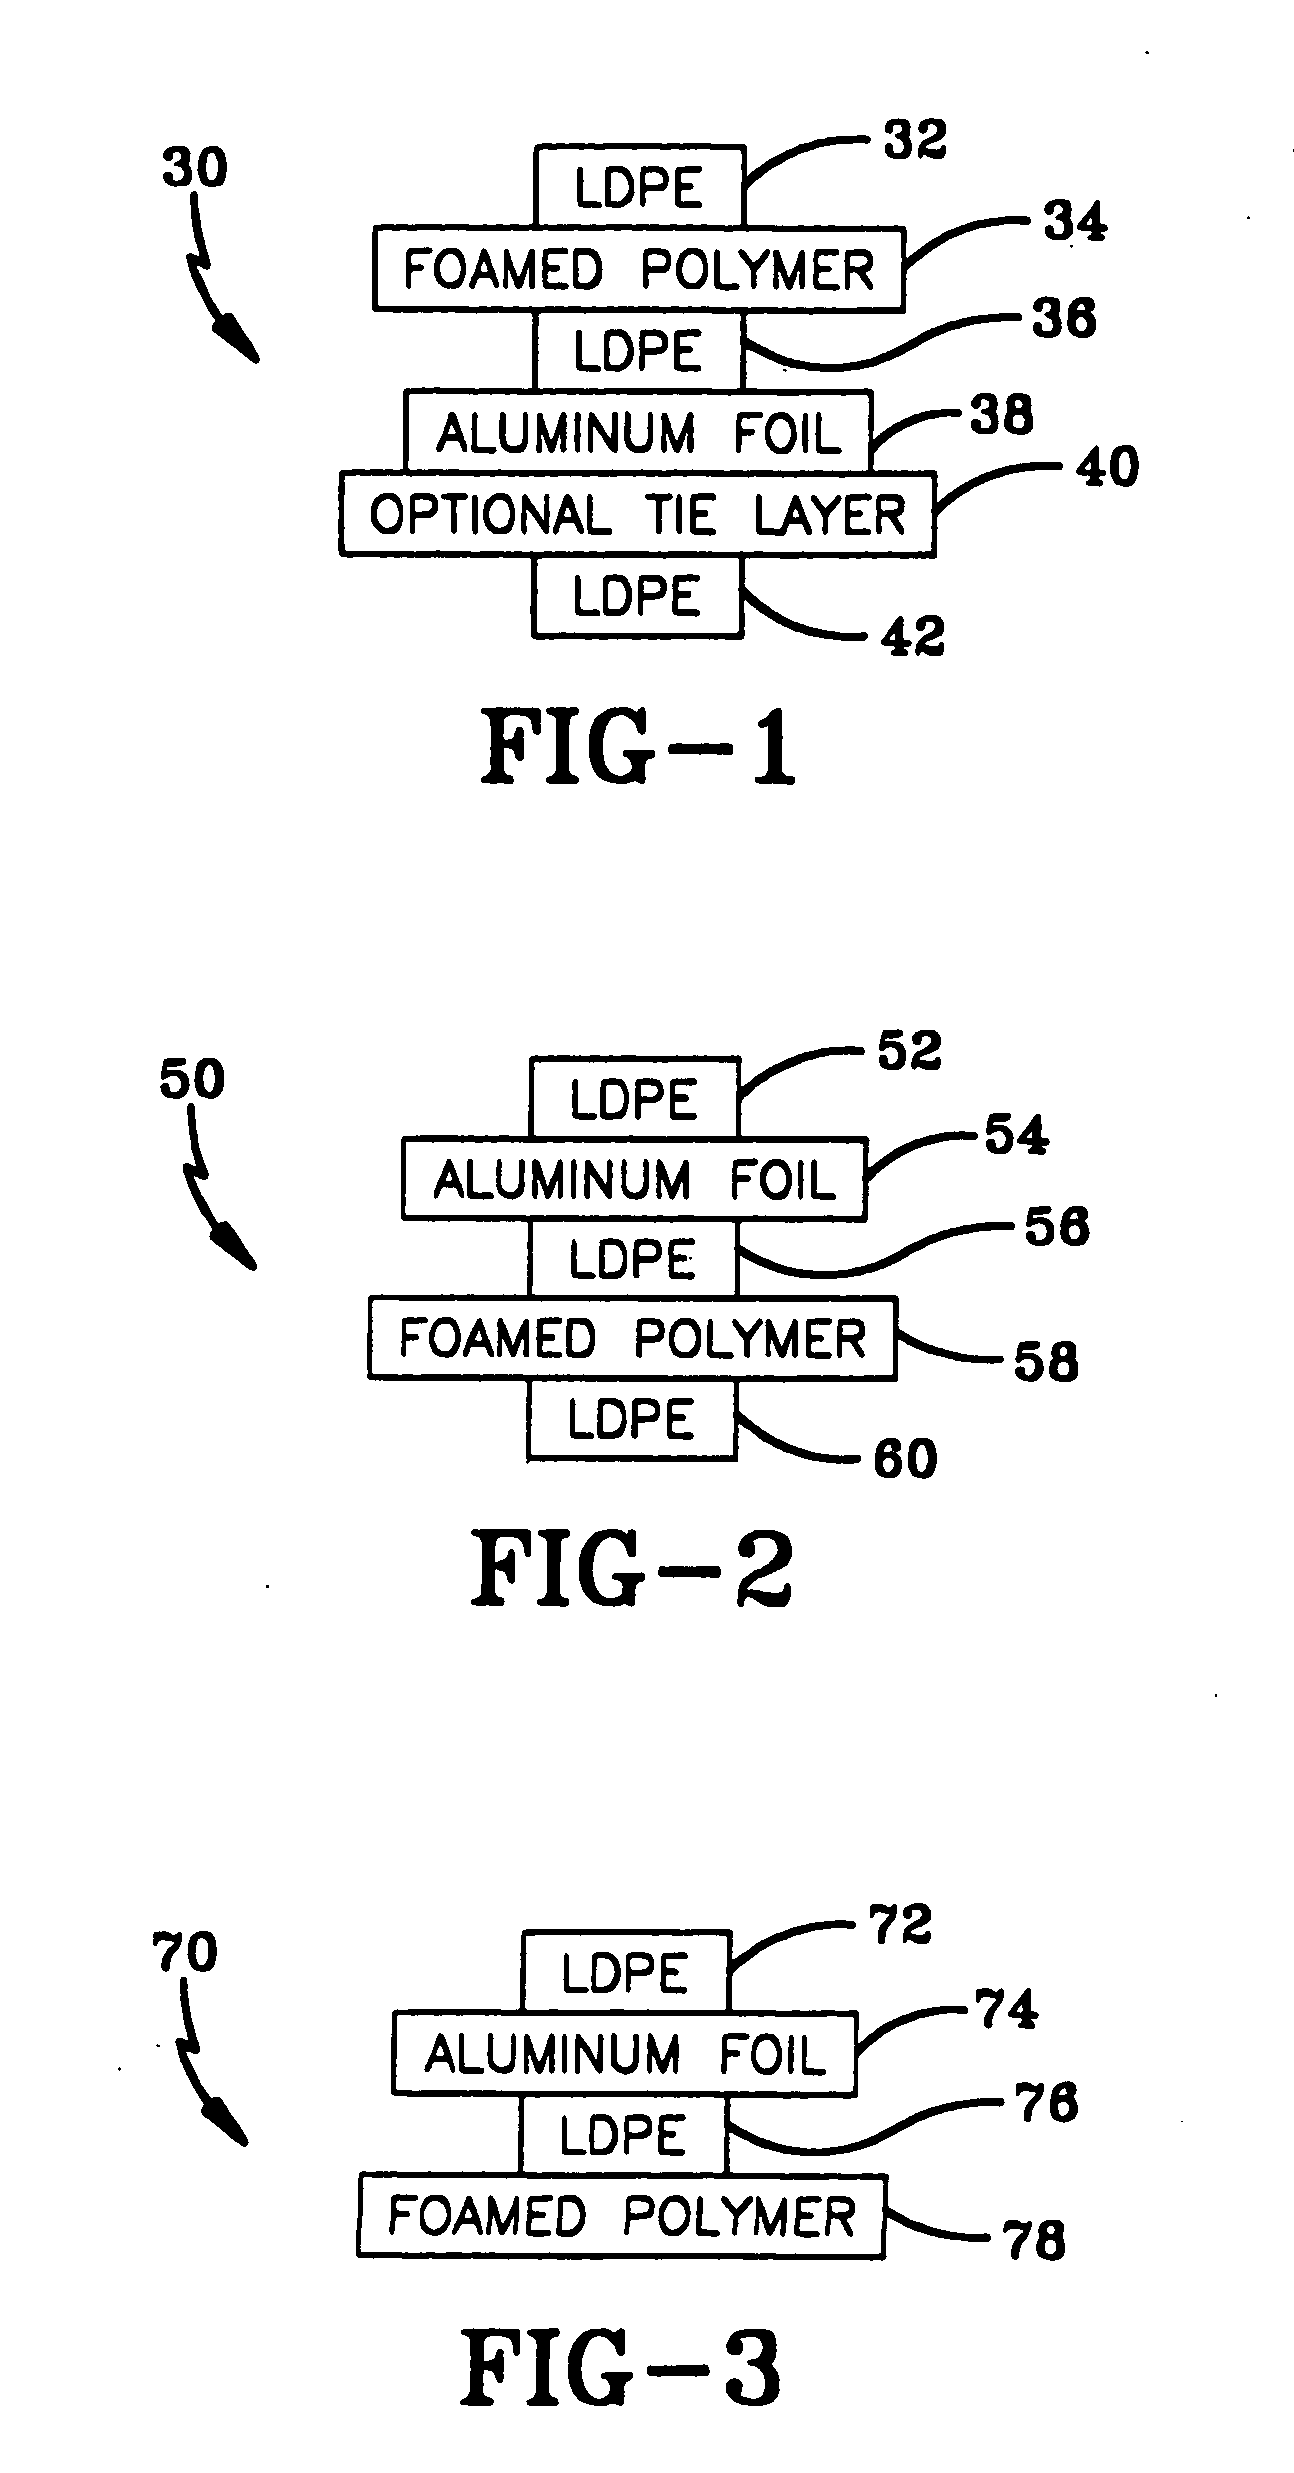 Containers prepared from laminate structures having a foamed polymer layer